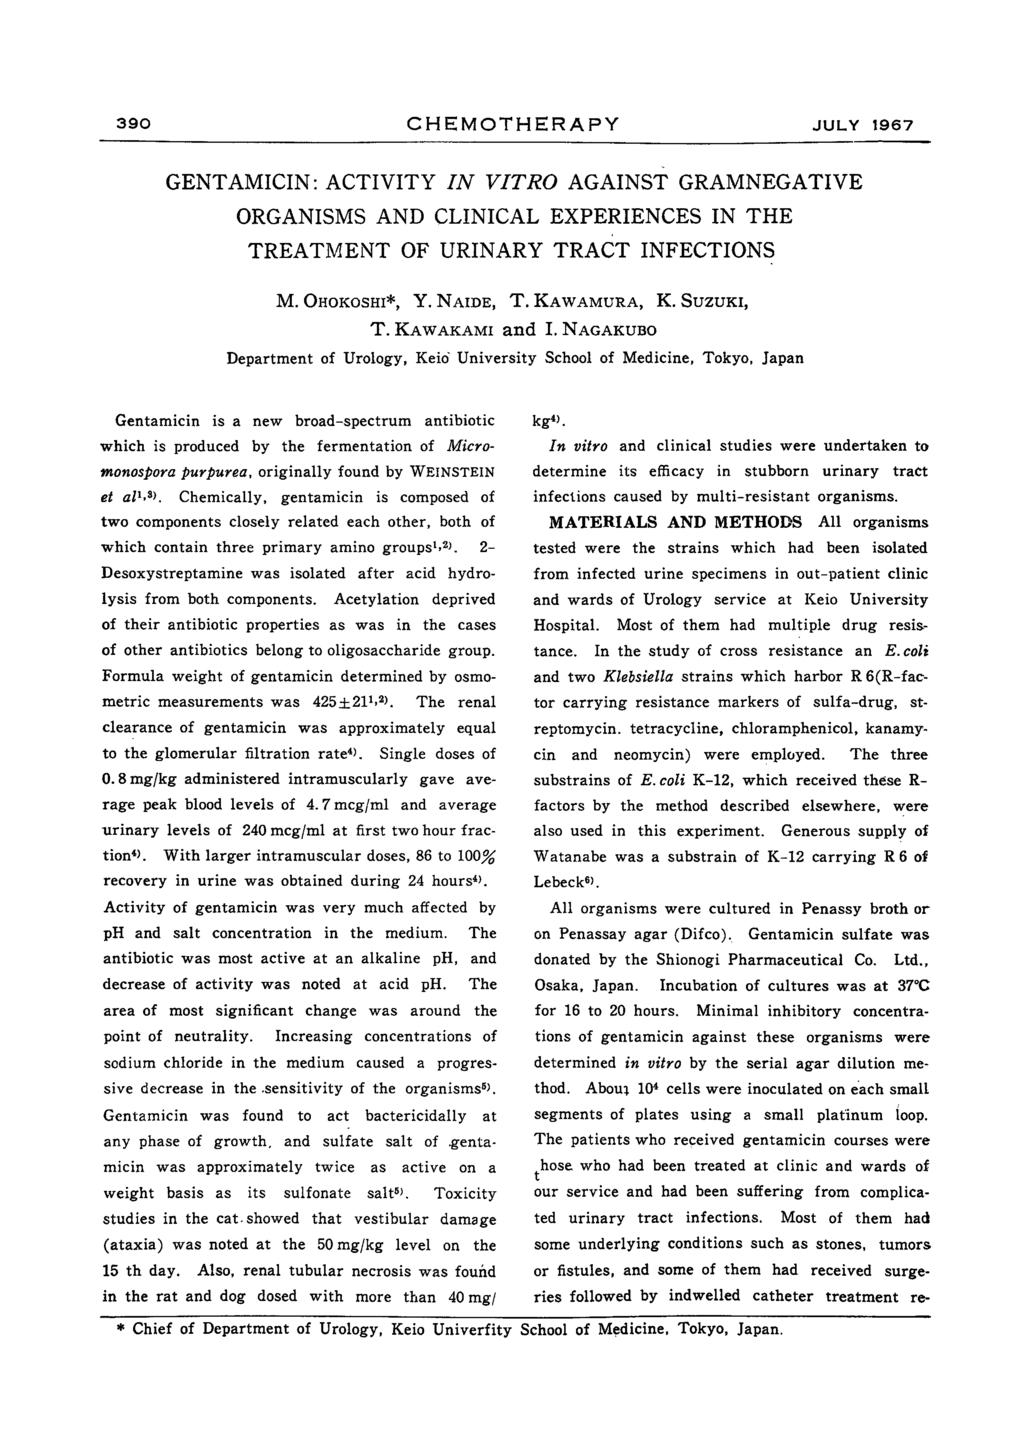 390 CHEMOTHERAPY JULY 1967 GENTAMICIN: ACTIVITY IN VITRO AGAINST GRAMNEGATIVE ORGANISMS AND CLINICAL EXPERIENCES IN THE TREATMENT OF URINARY TRACT INFECTIONS M. OHOKOSHI*, Y. NAIDE, T. KAWAMURA, K.